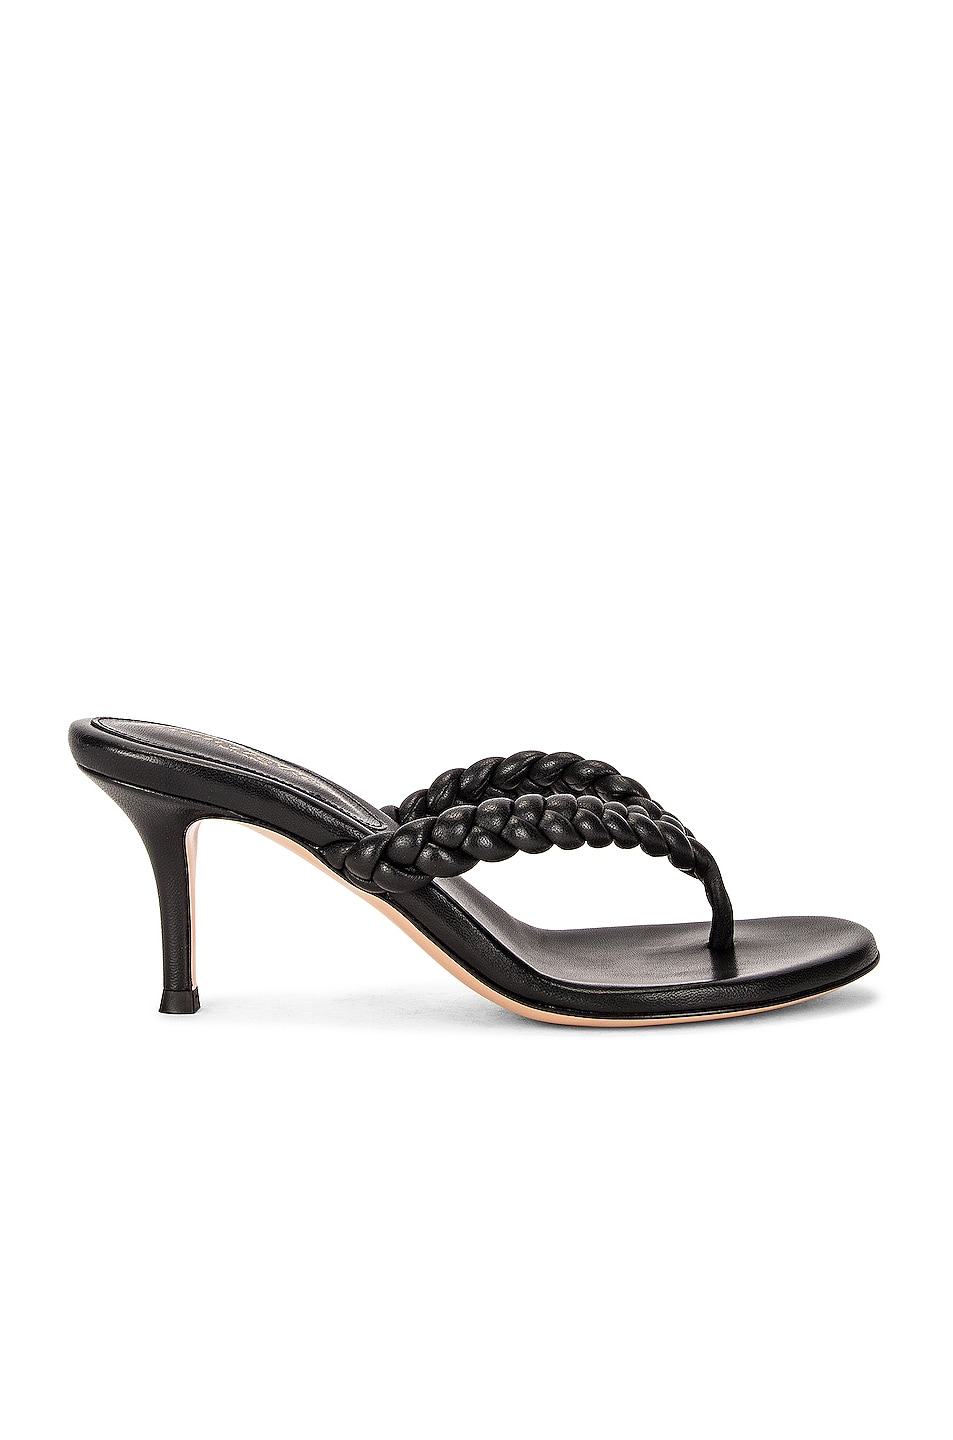 Image 1 of Gianvito Rossi Tropea Leather Sandals in Black